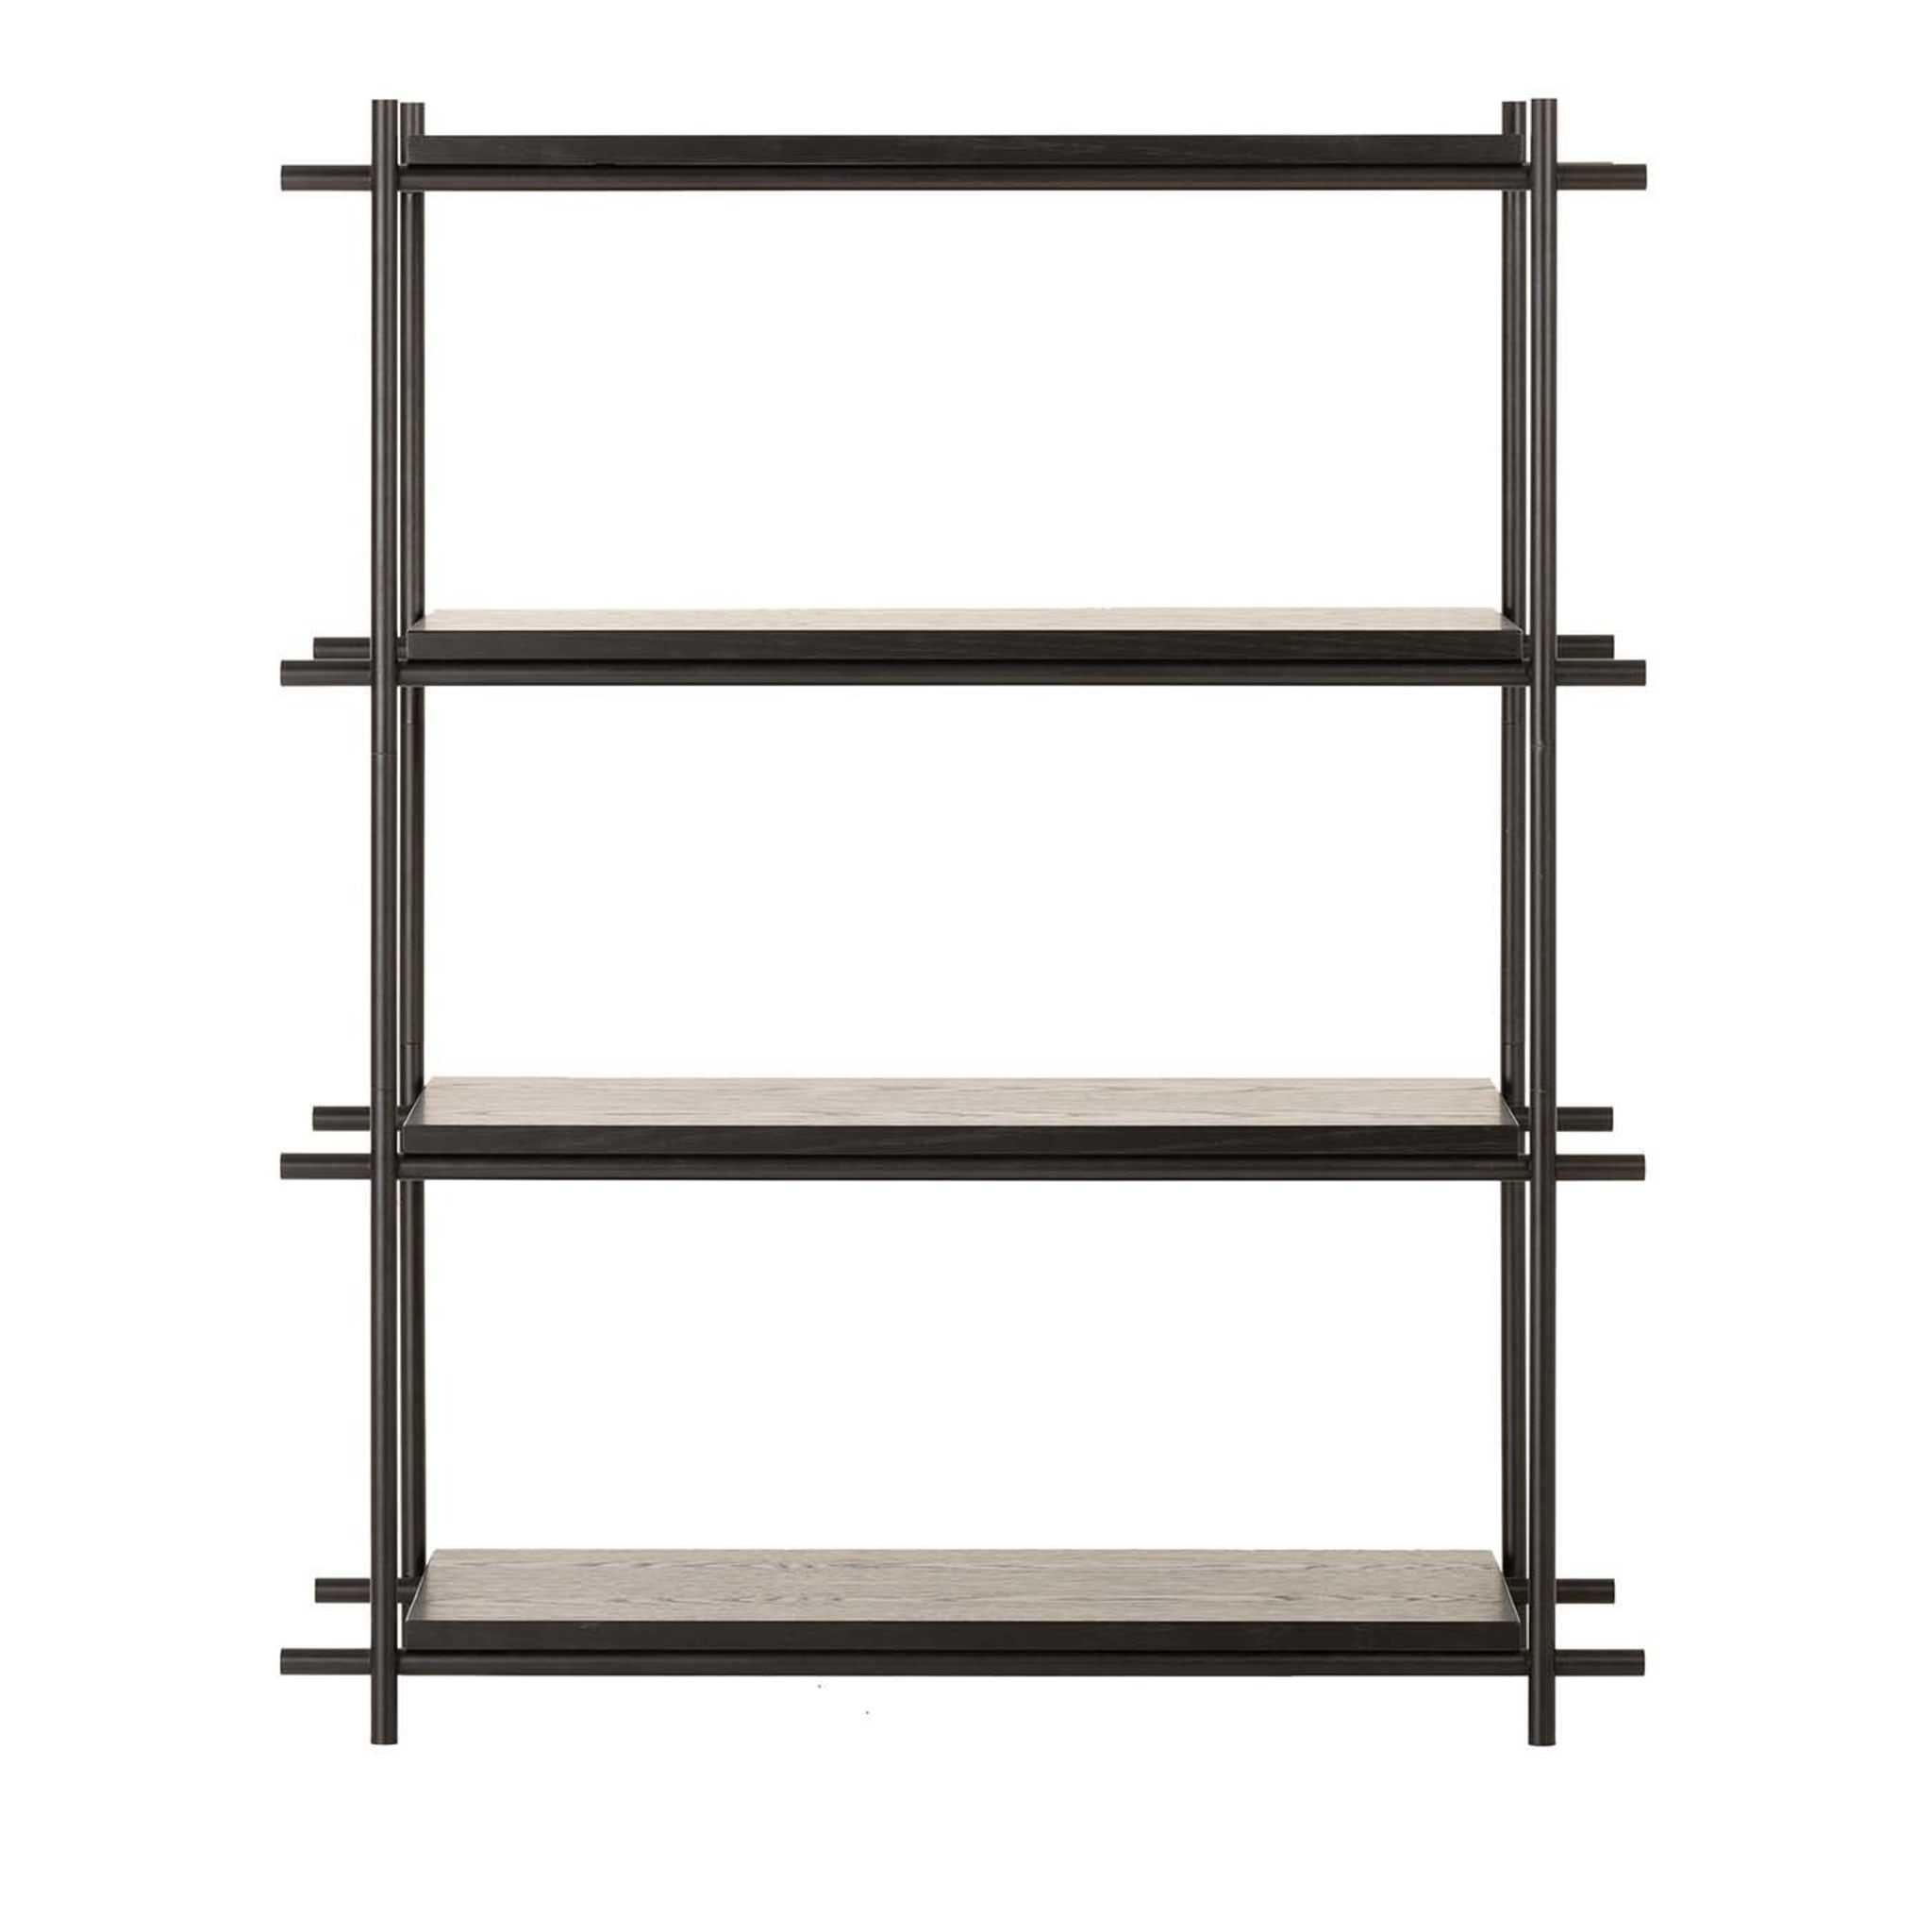 Innocent 3-Unit Bookcase by Gio Tirotto - Main view